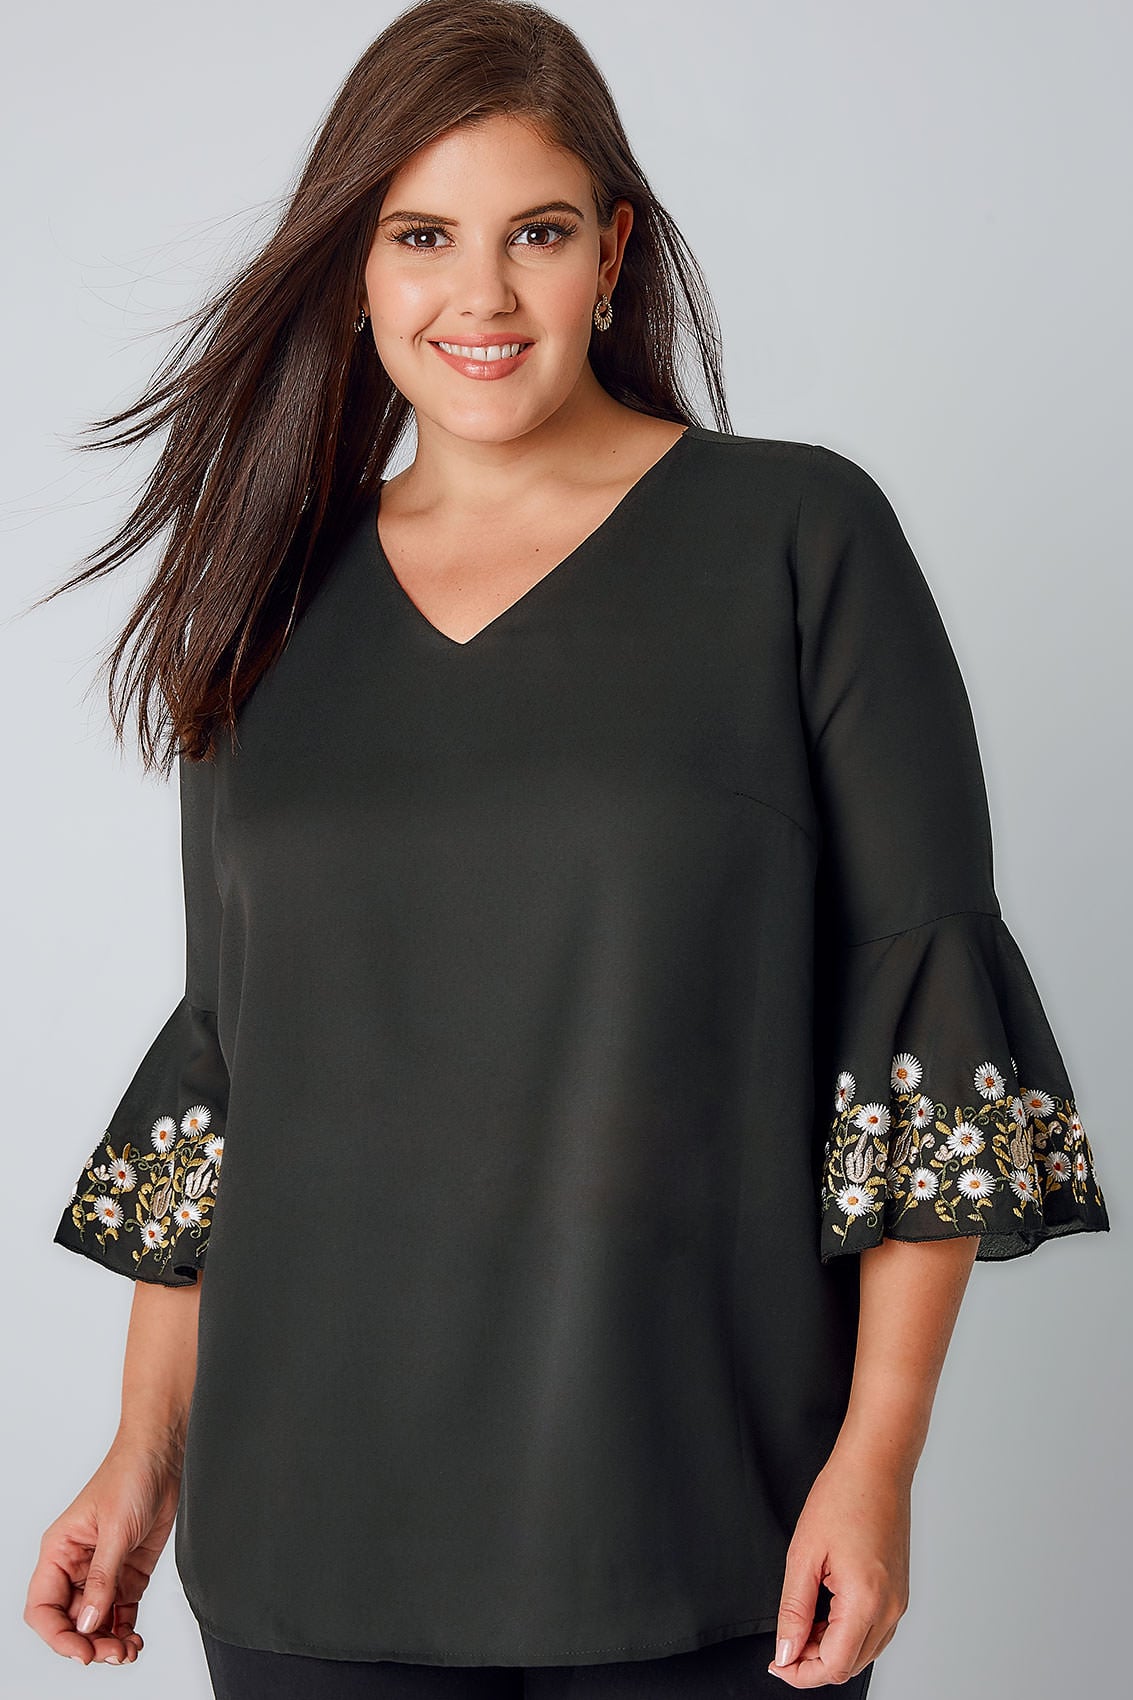 Black Woven Top With Embroidered Flute Sleeves, Plus size 16 to 32